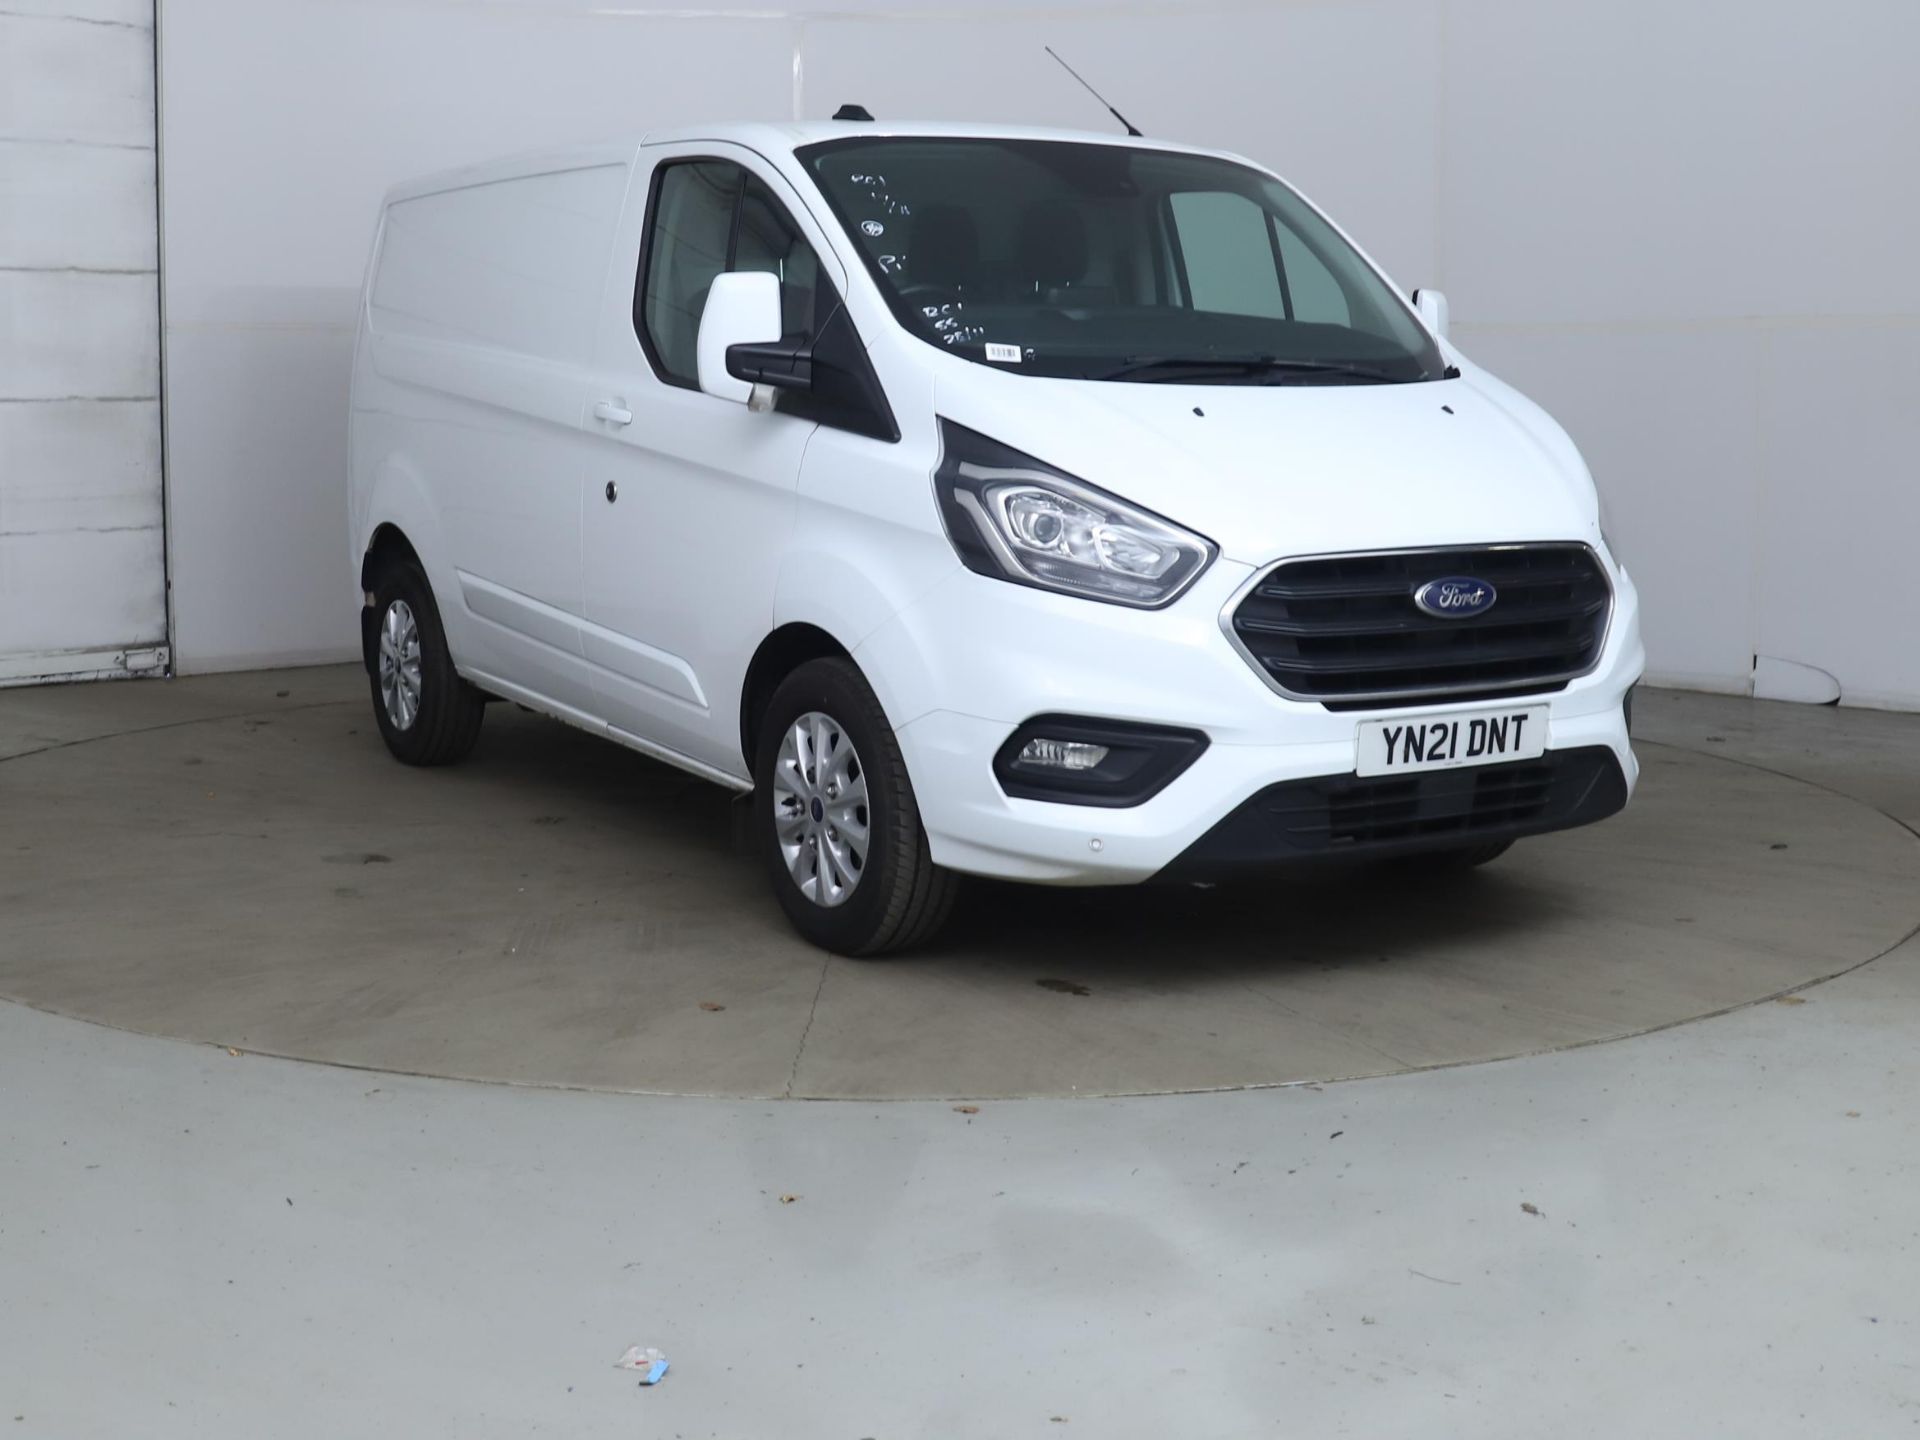 FORD TRANSIT "CUSTOM" LIMITED 2.0 TDCI (130) 21 REG - 1 OWNER - ONLY 46K MILES - AIR CON - ALLOYS - Image 4 of 12